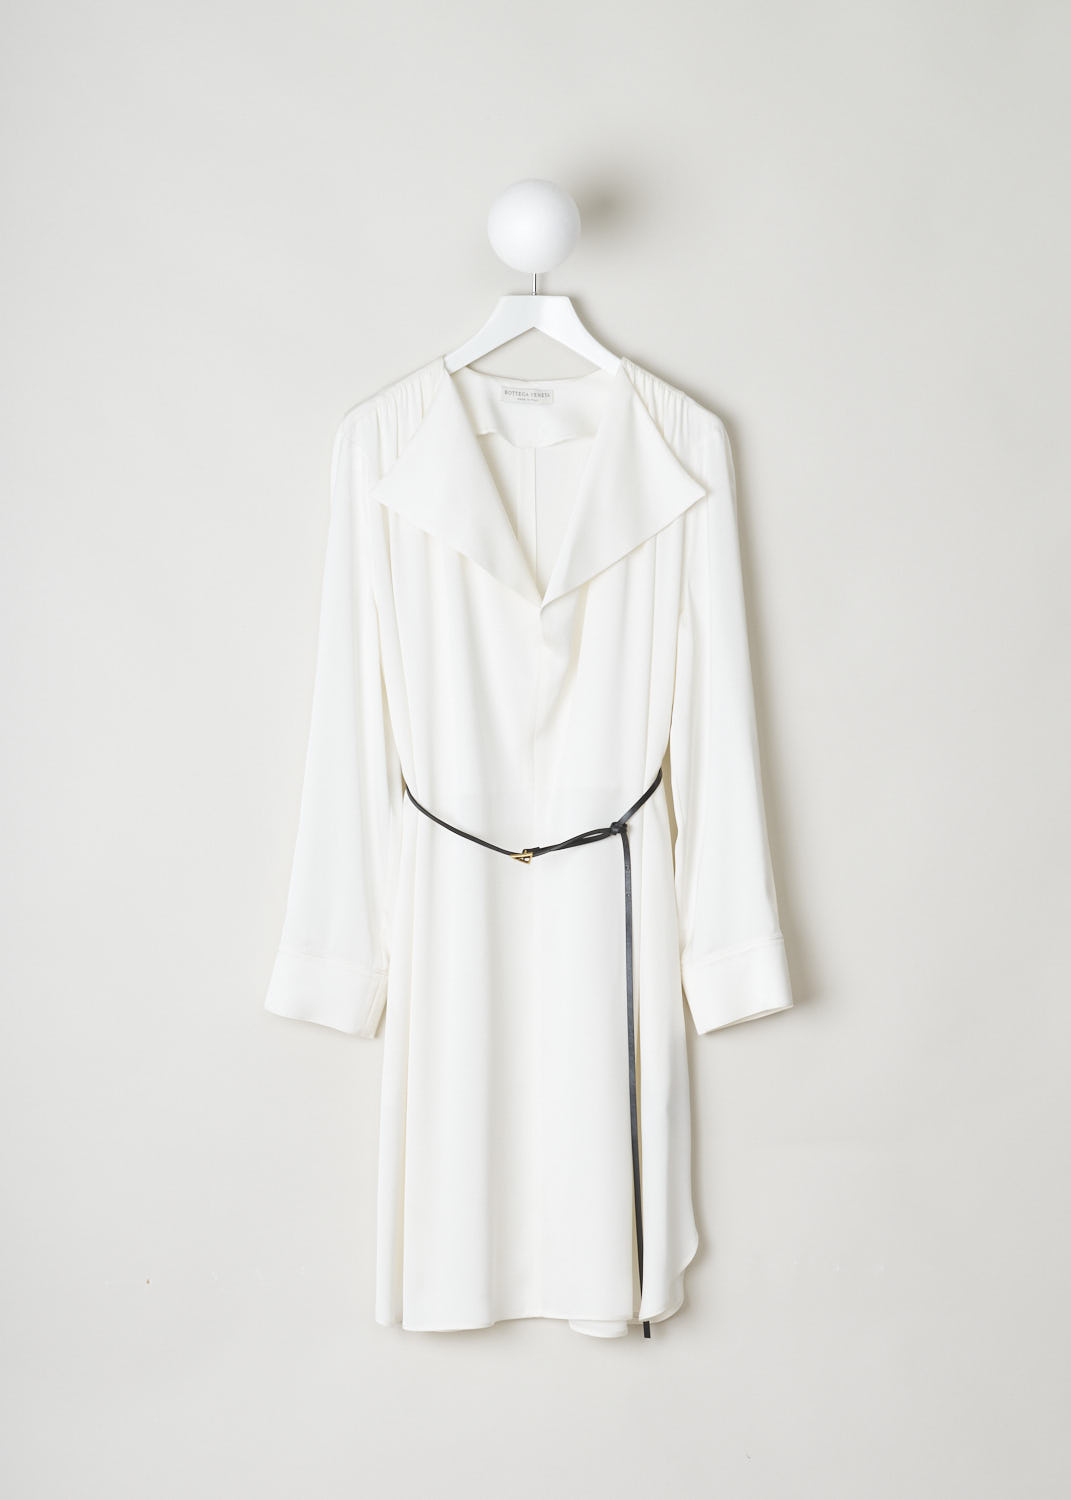 BOTTEGA VENETA, WHITE SILK DRESS WITH CONTRASTING BELT, 606454_VKJ90_8329, White, Front, This silky smooth, long sleeved dress has a deep V-neck with an exaggerated pliable collar. Across the shoulders, dainty little pleats can be found. The dress comes with a thin, contrasting black belt in leather, with its belt buckle being the recognizable gold-toned triangle.  
